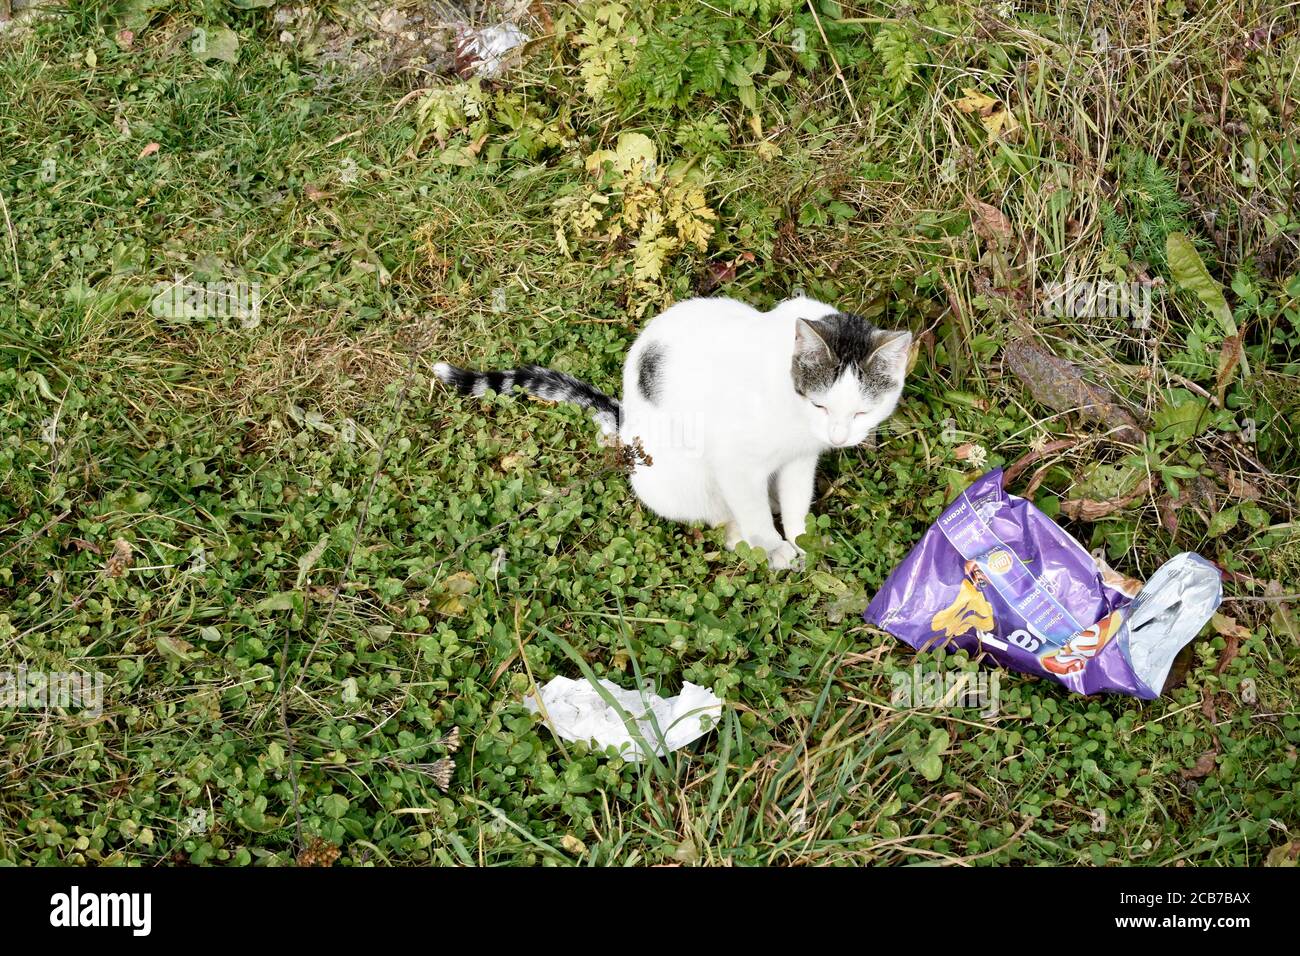 Little cat on the grass in the forest, near a throw away wrapper. Stock Photo